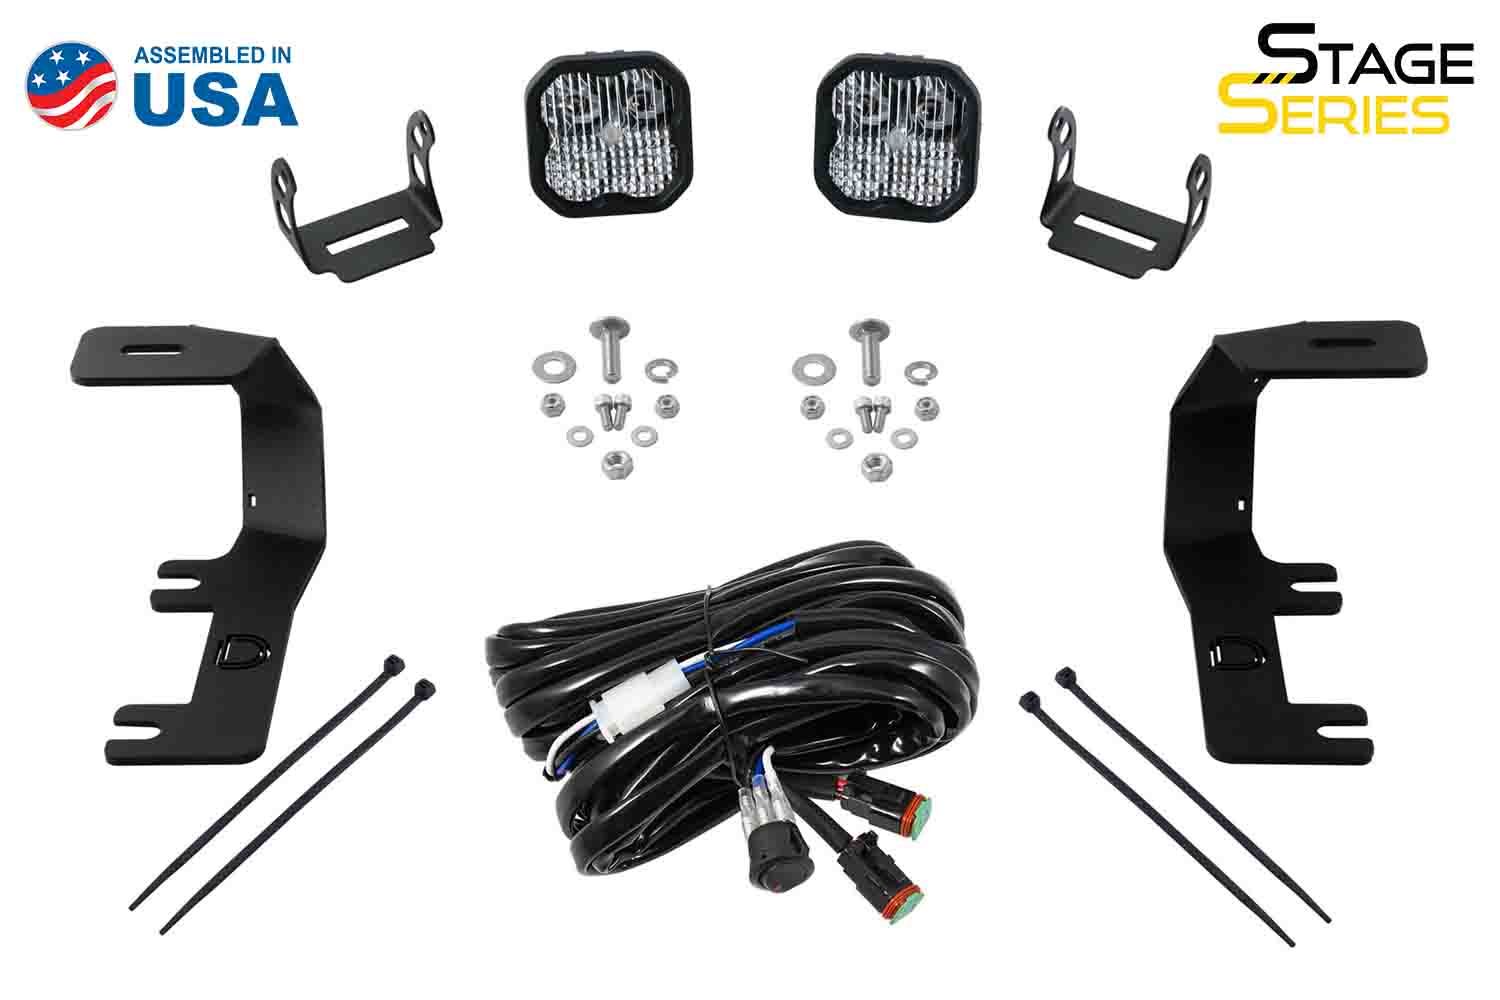 Stage Series Led Ditch Light Kit For 2014-2019 Chevrolet Silverado 150 –  Ess K Customs